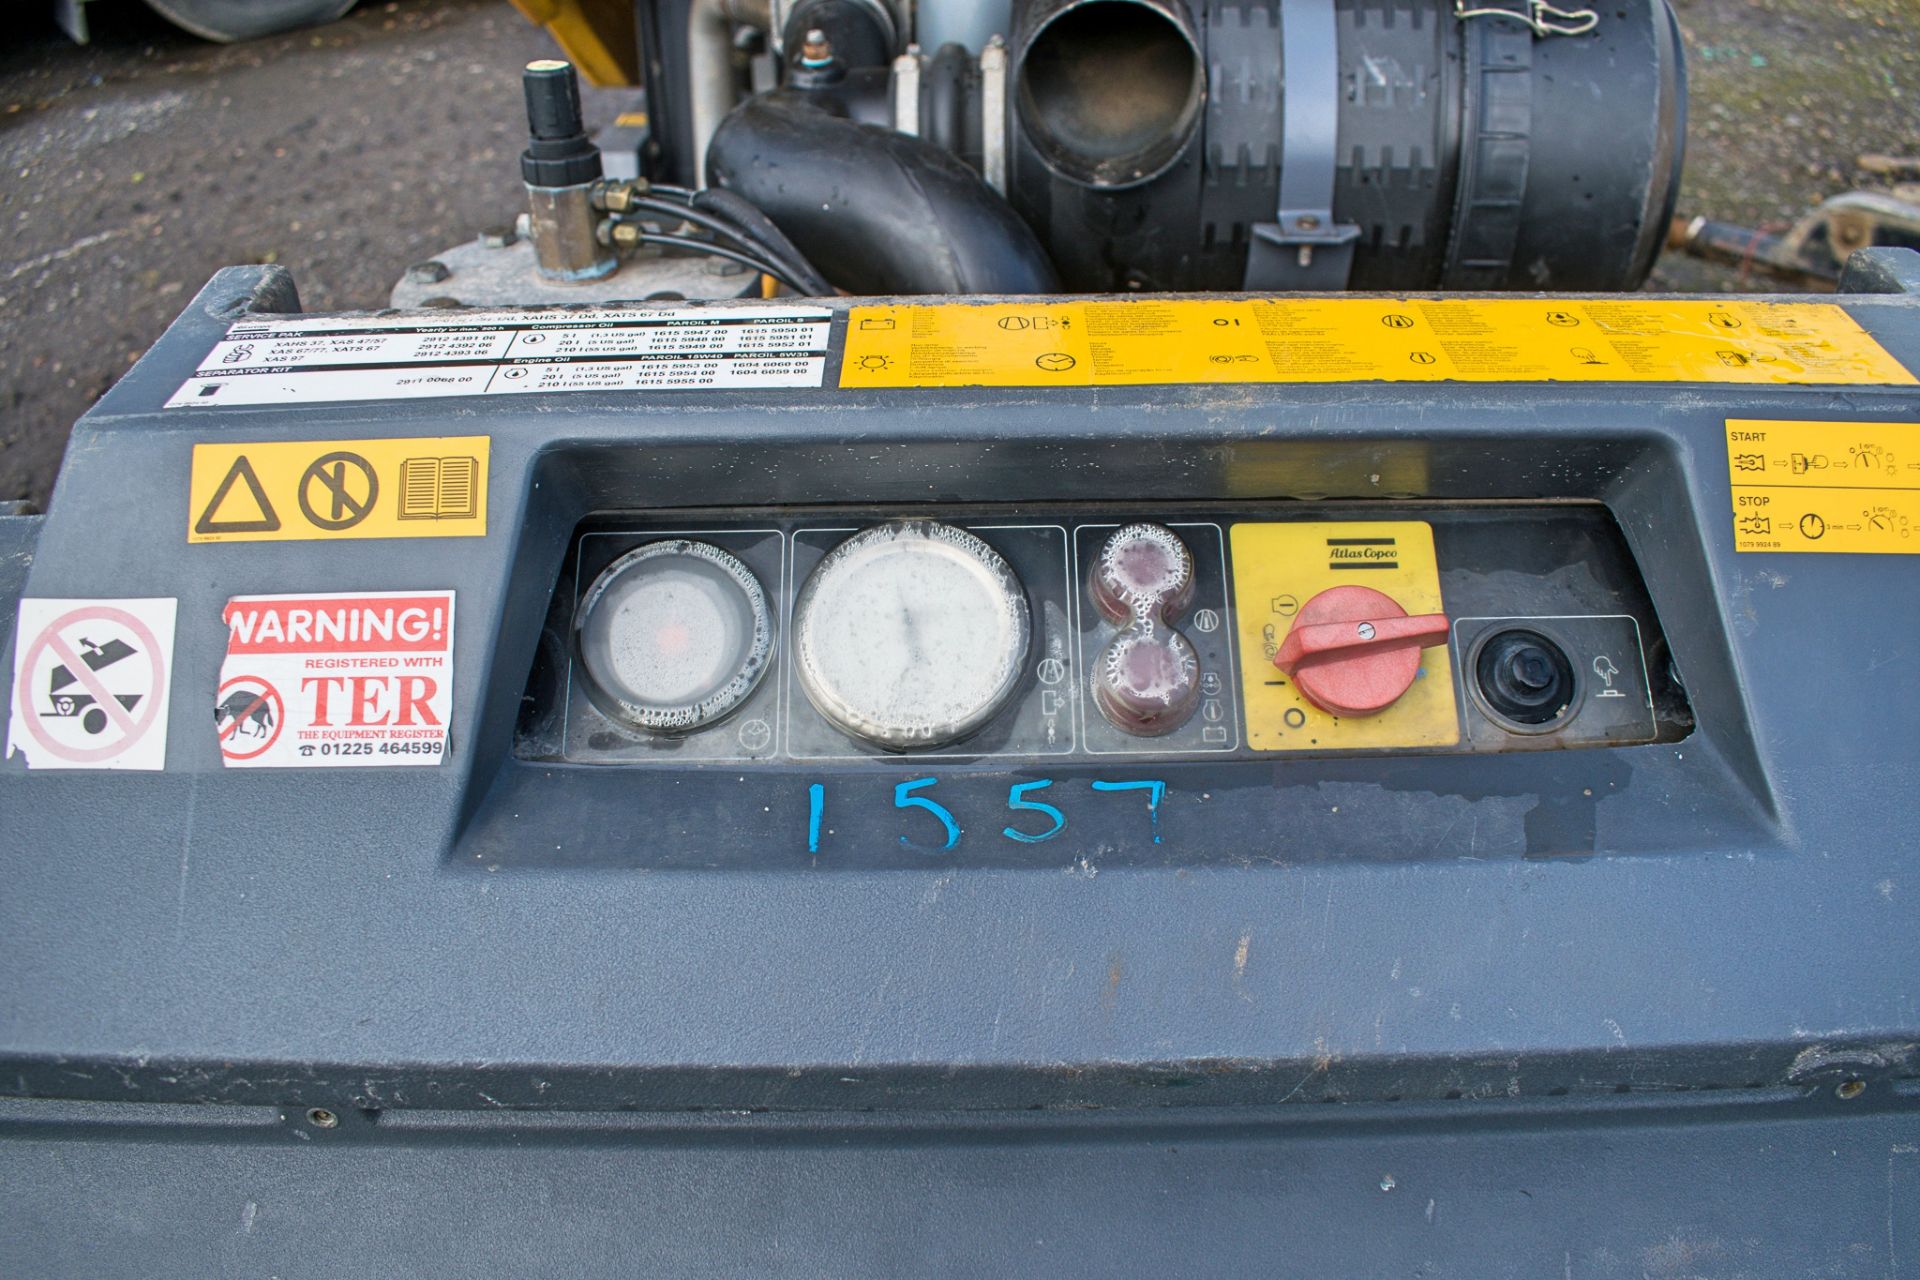 Atlas Copco XAS 37 diesel driven mobile air compressor  Year: 2008 S/N: 1119 Recorded Hours: 1649 - Image 5 of 5